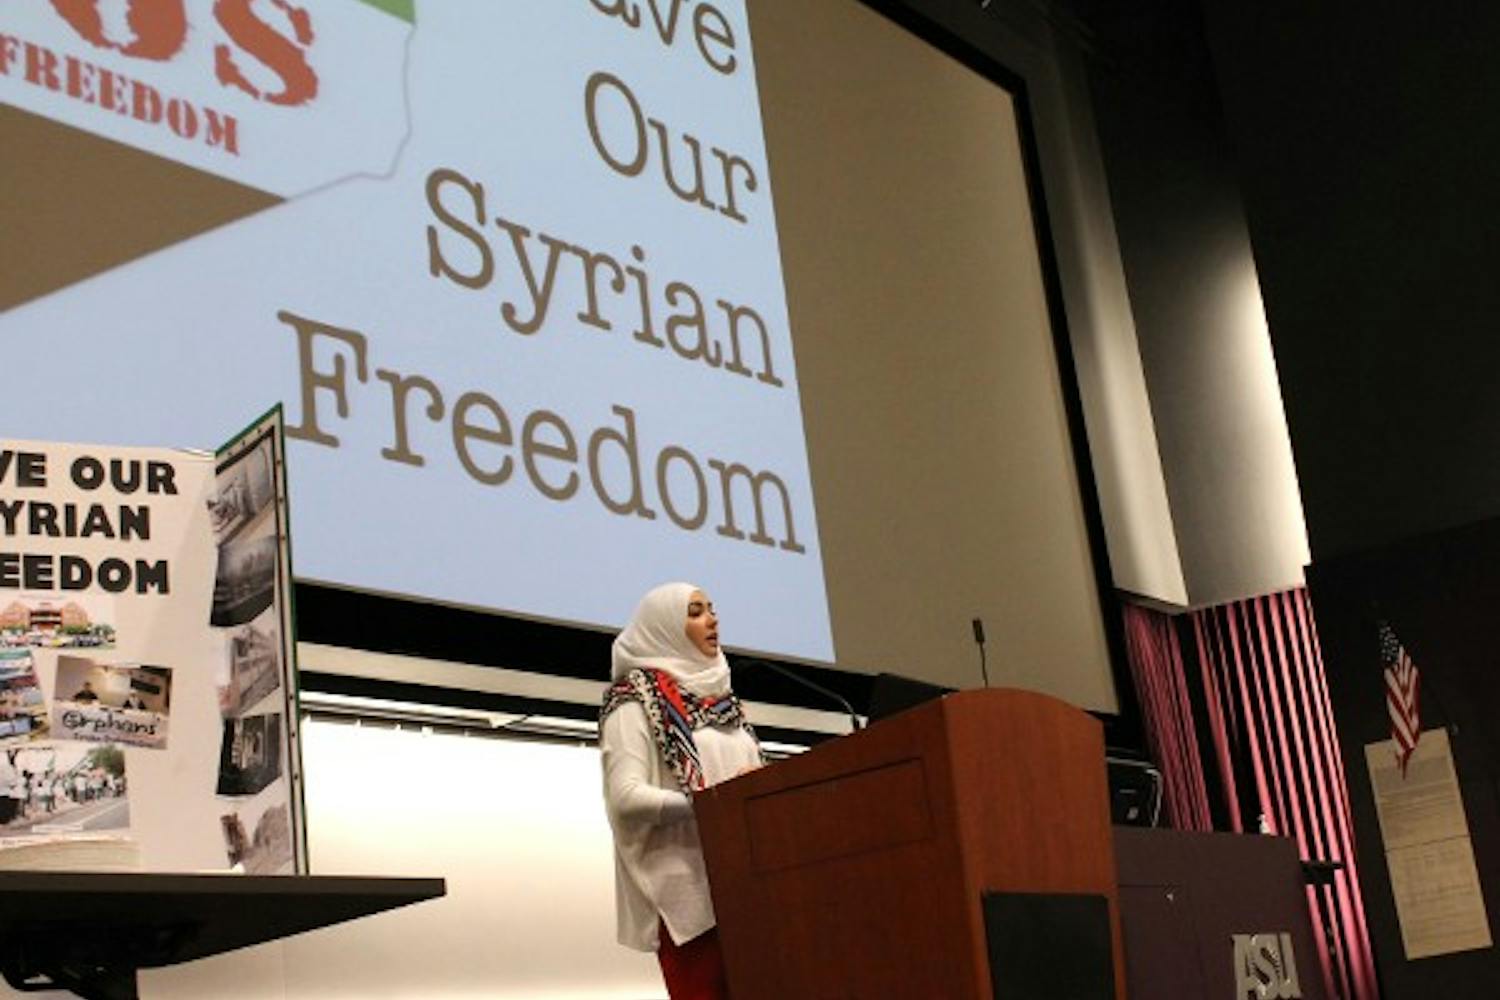 Yisser Bittar, 23 and advocate of the Syrian American Council, speaks at an event hosted by Save Our Syrian Freedom. (Photo by Laura Davis)